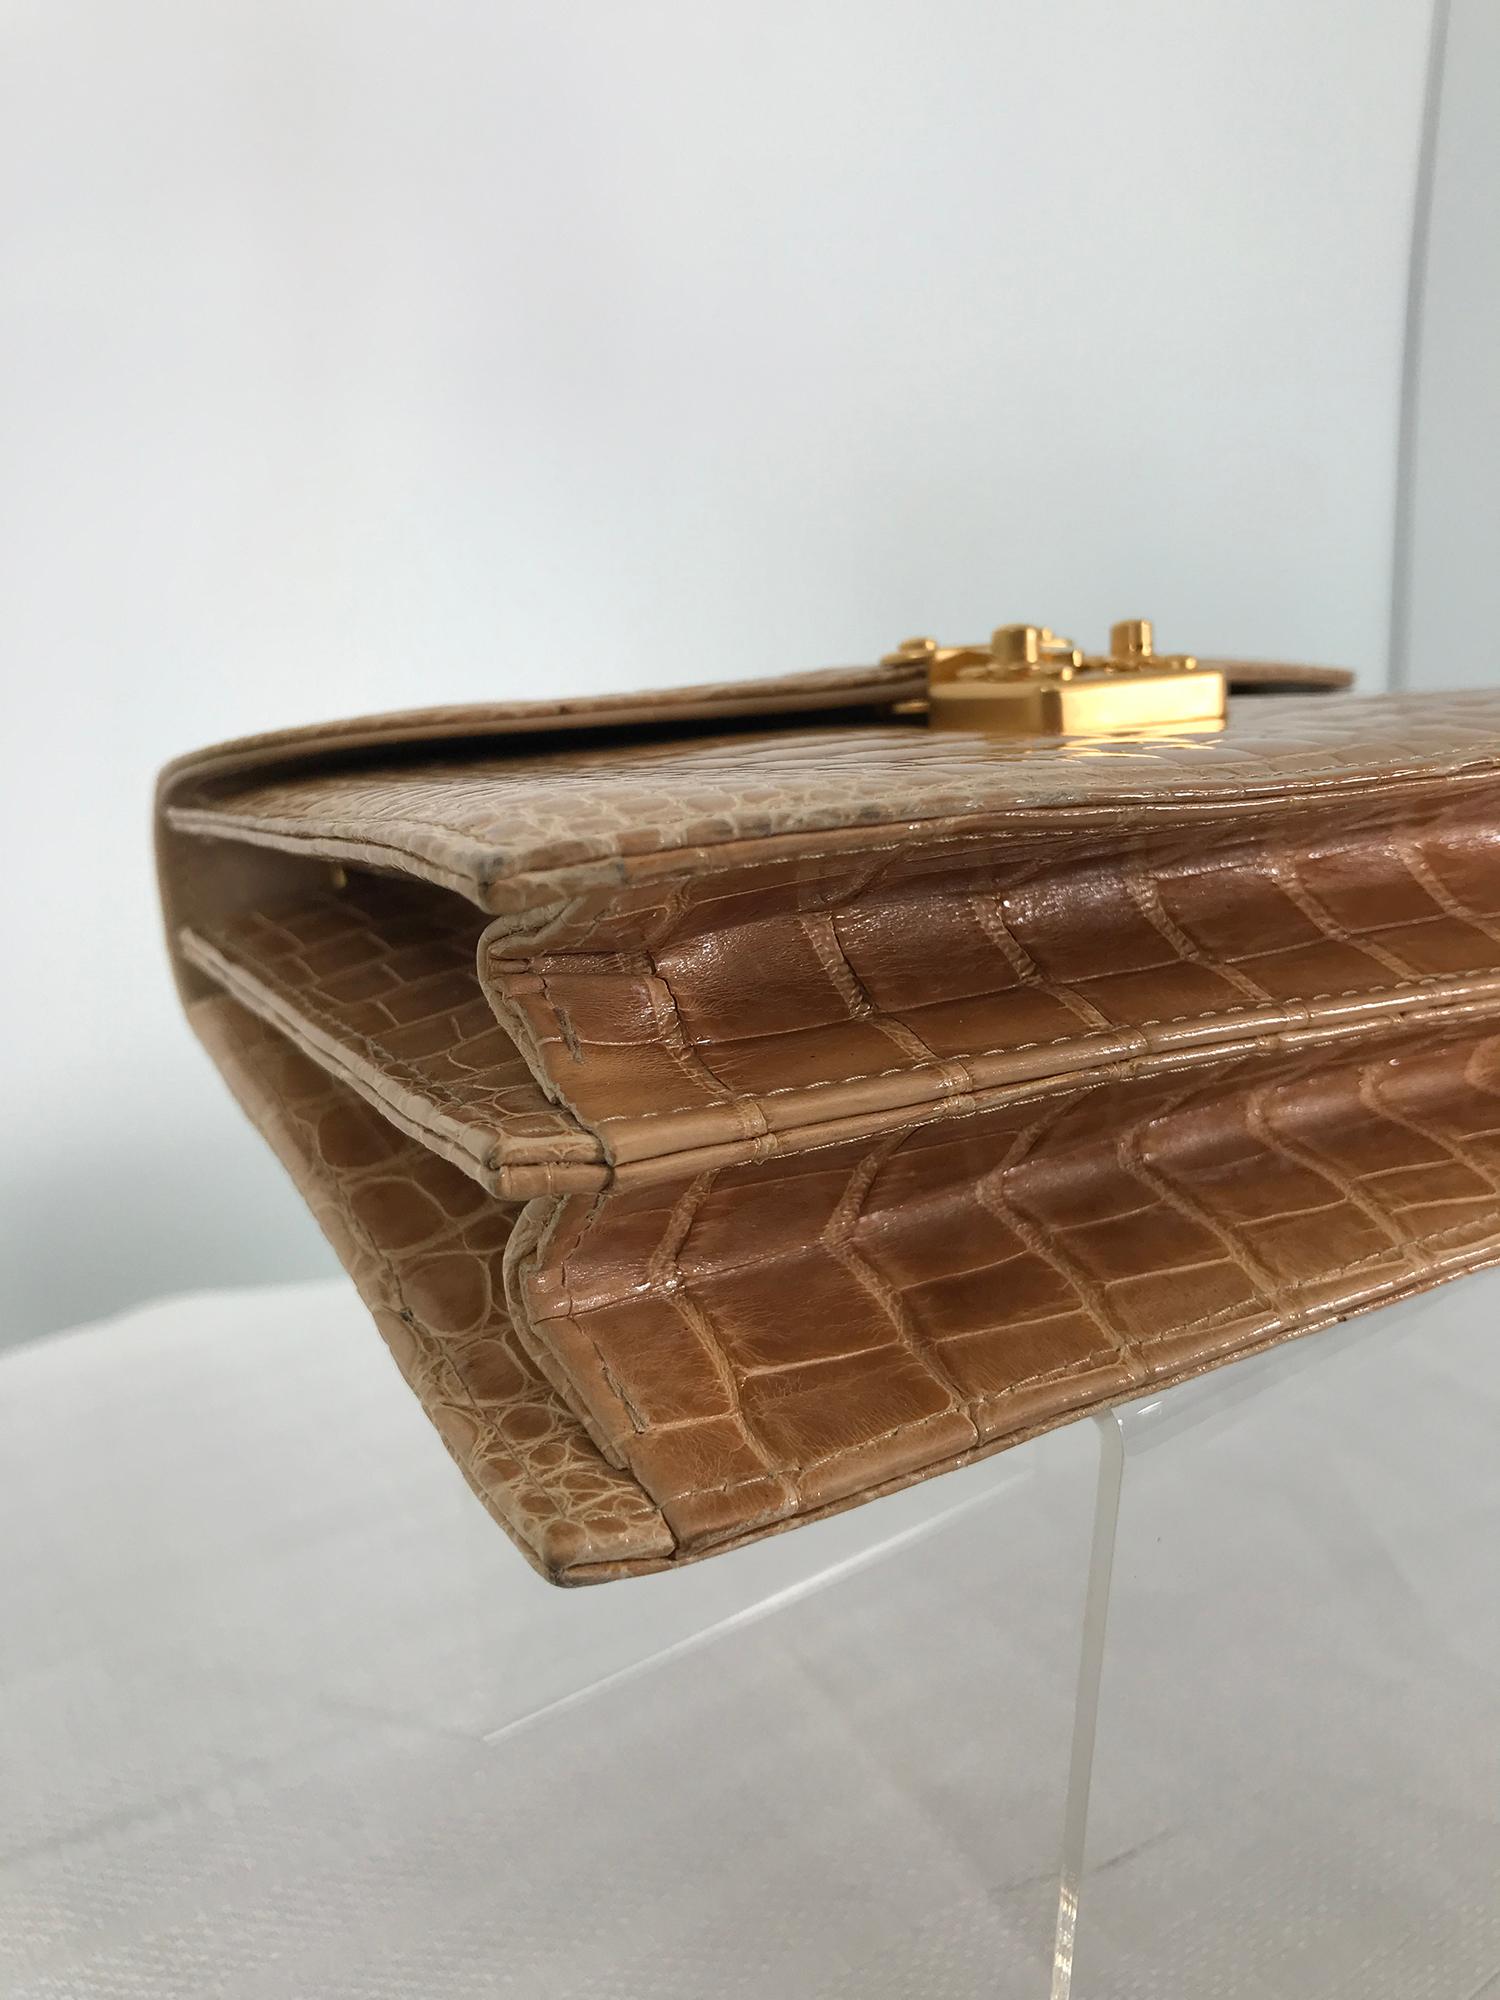 Lana of London Blond Alligator Clutch or Shoulder Bag In Good Condition For Sale In West Palm Beach, FL